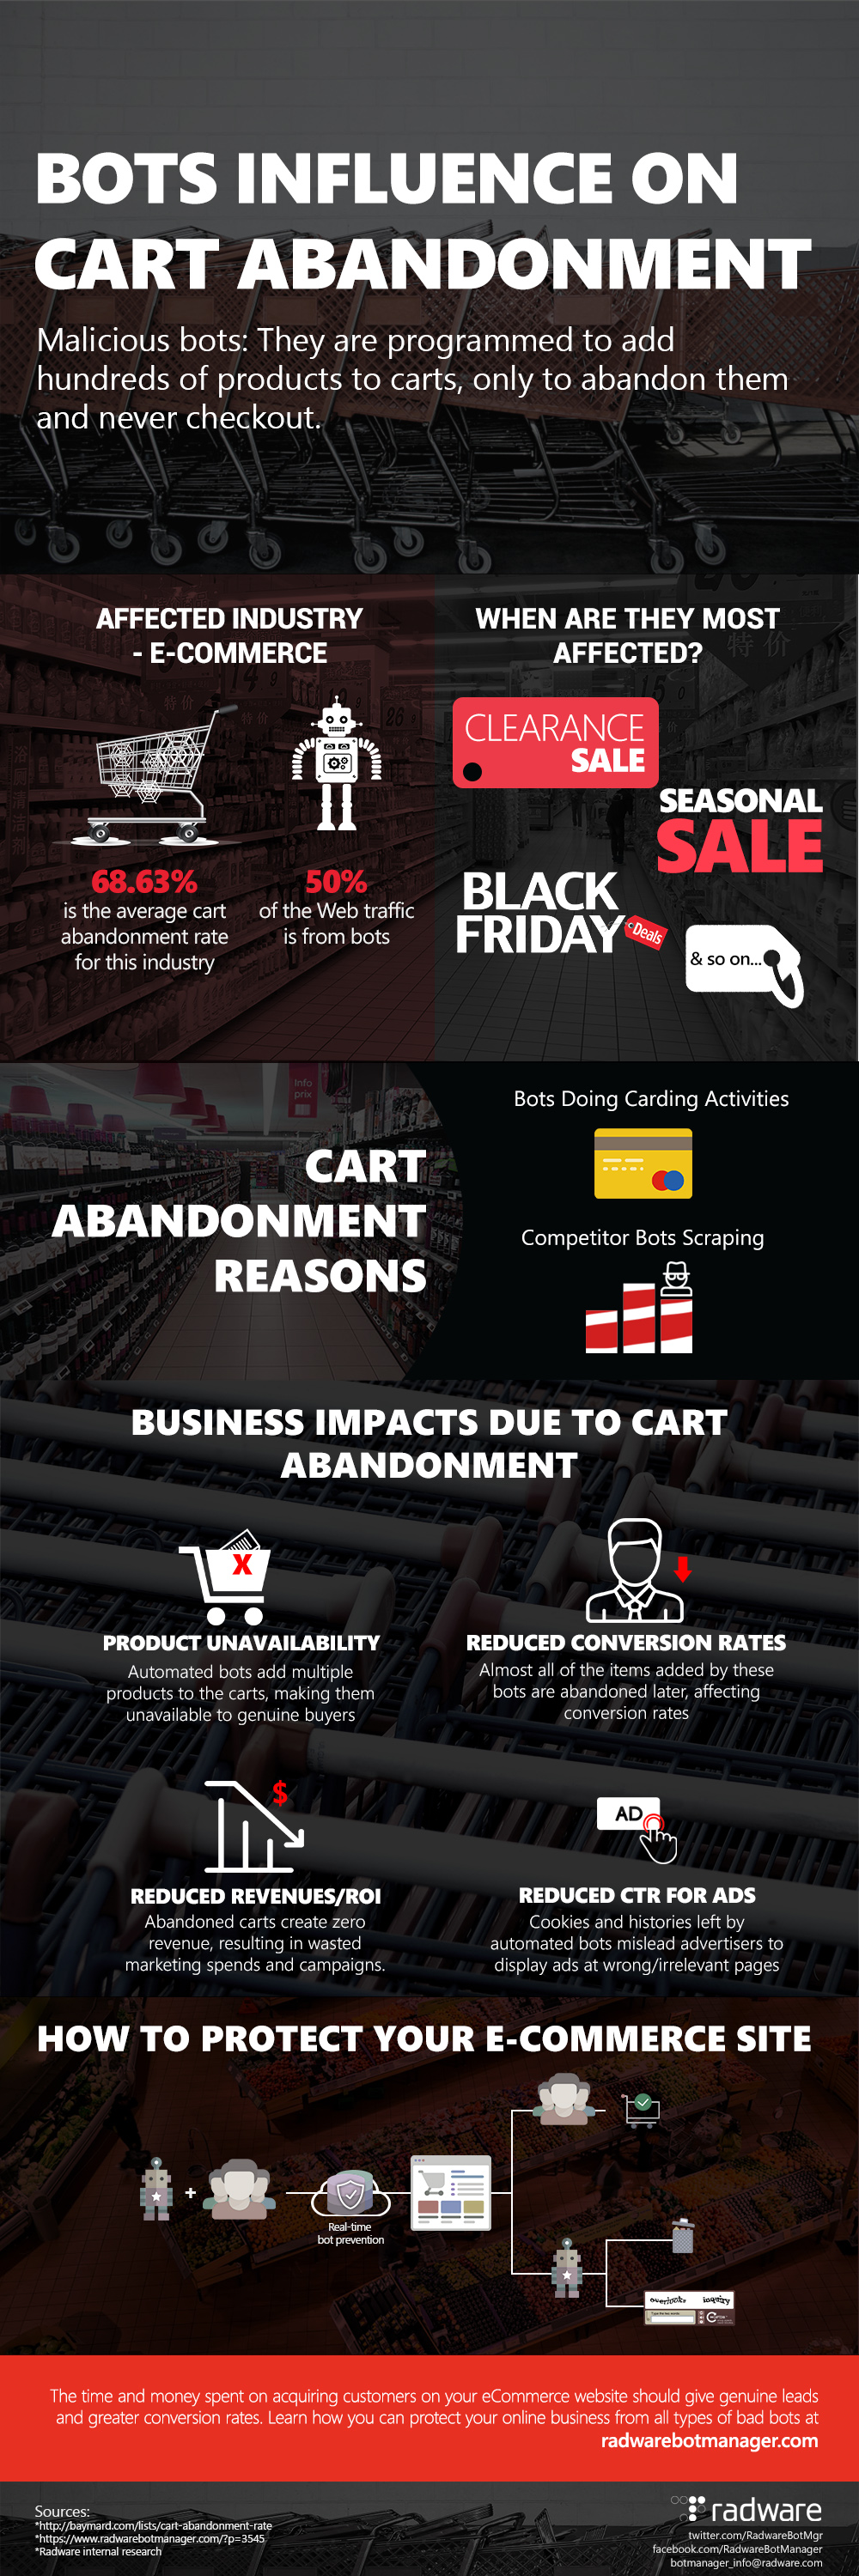 Cart abandonment rates in eCommerce due to bots